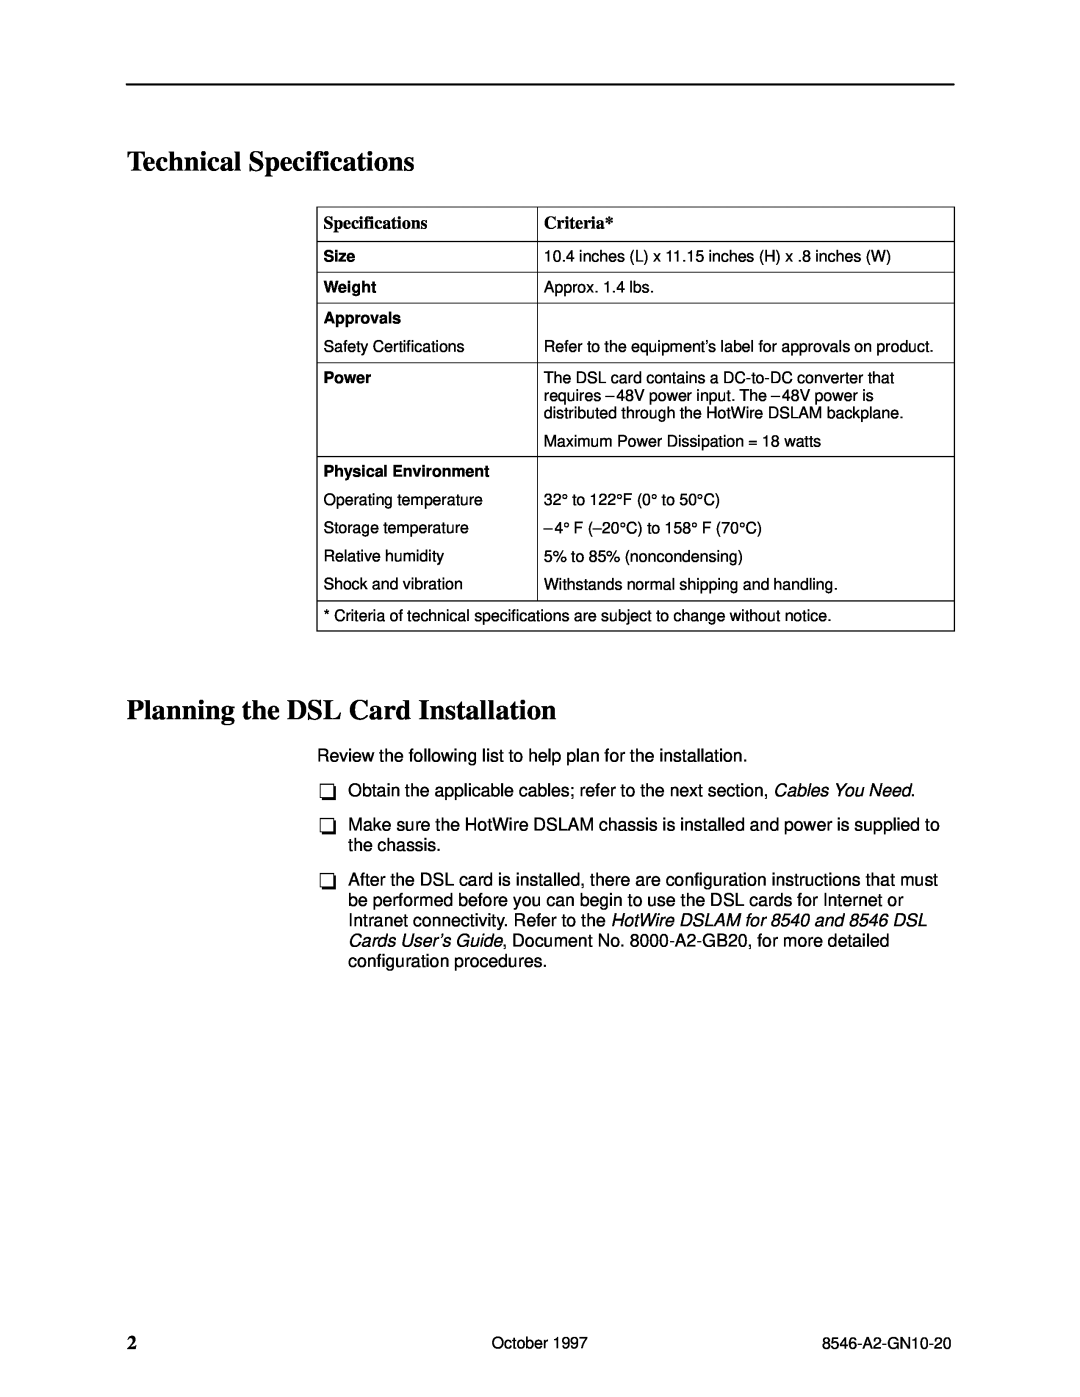 Paradyne 8546 installation instructions Technical Specifications, Planning the DSL Card Installation, Criteria 